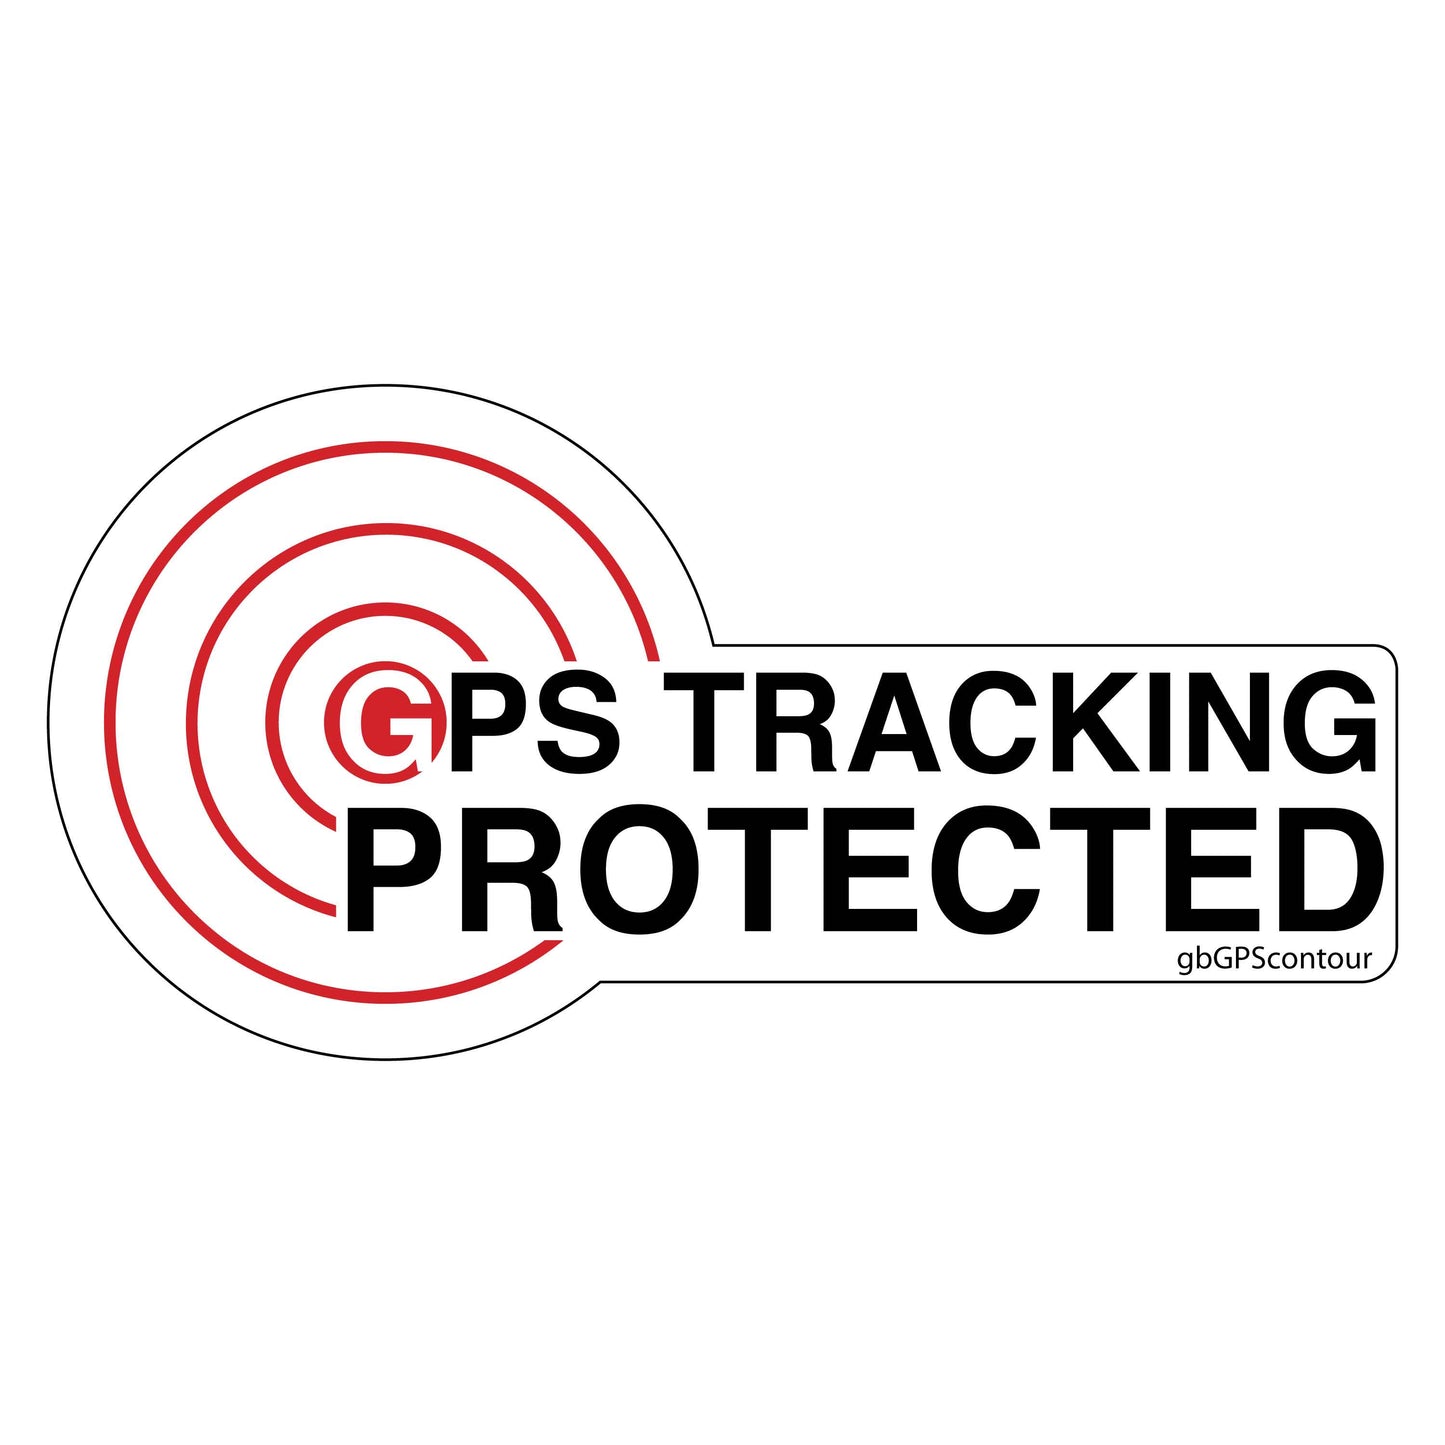 GPS Tracking Protected, Contour Cut Decal. 3.5 inches by 1.75 inches in size. 